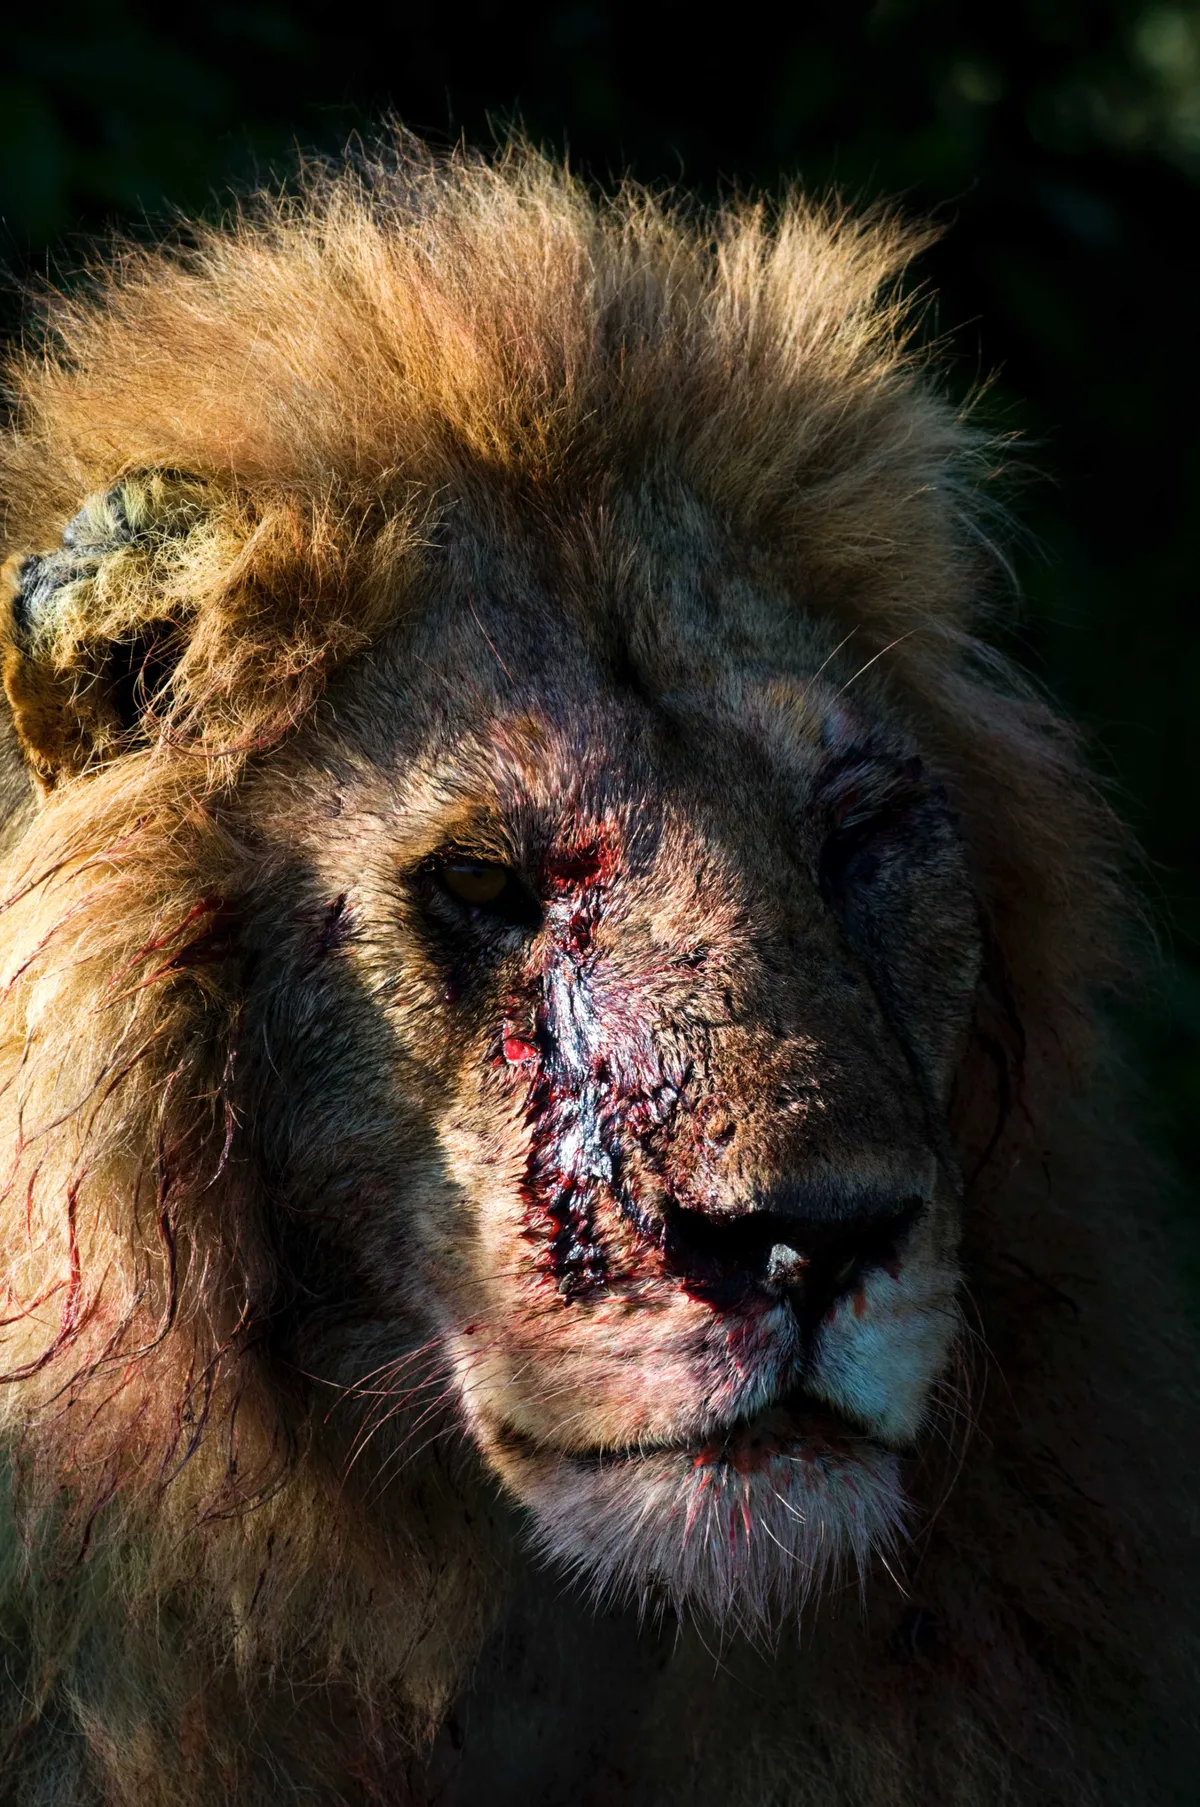 Victorious male lion after a fight. I think this image sums up the brutality of nature but also the persistence of the protagonists within it; animals don't give up, they just keep going. © David Plummer